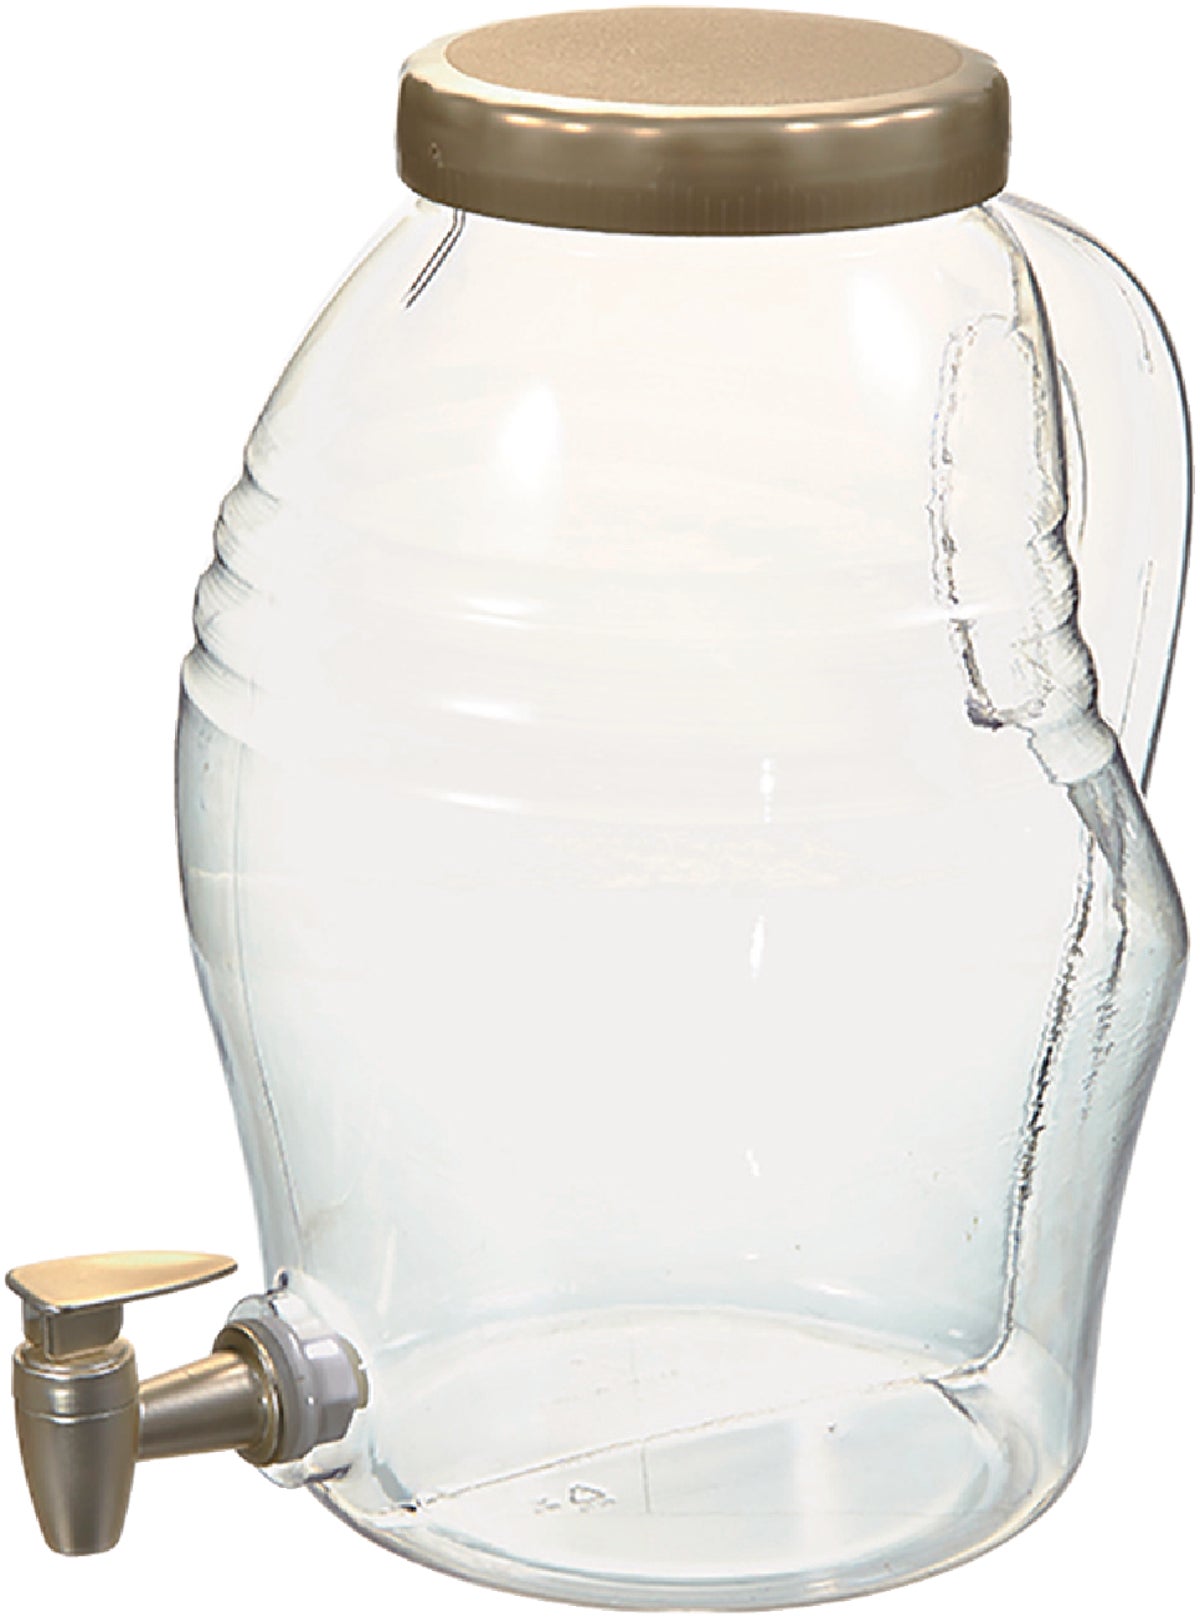 Pitcher with Lid 1 Gallon, Slim Clear Plastic Water Pitcher with Pivot-Top  Spout